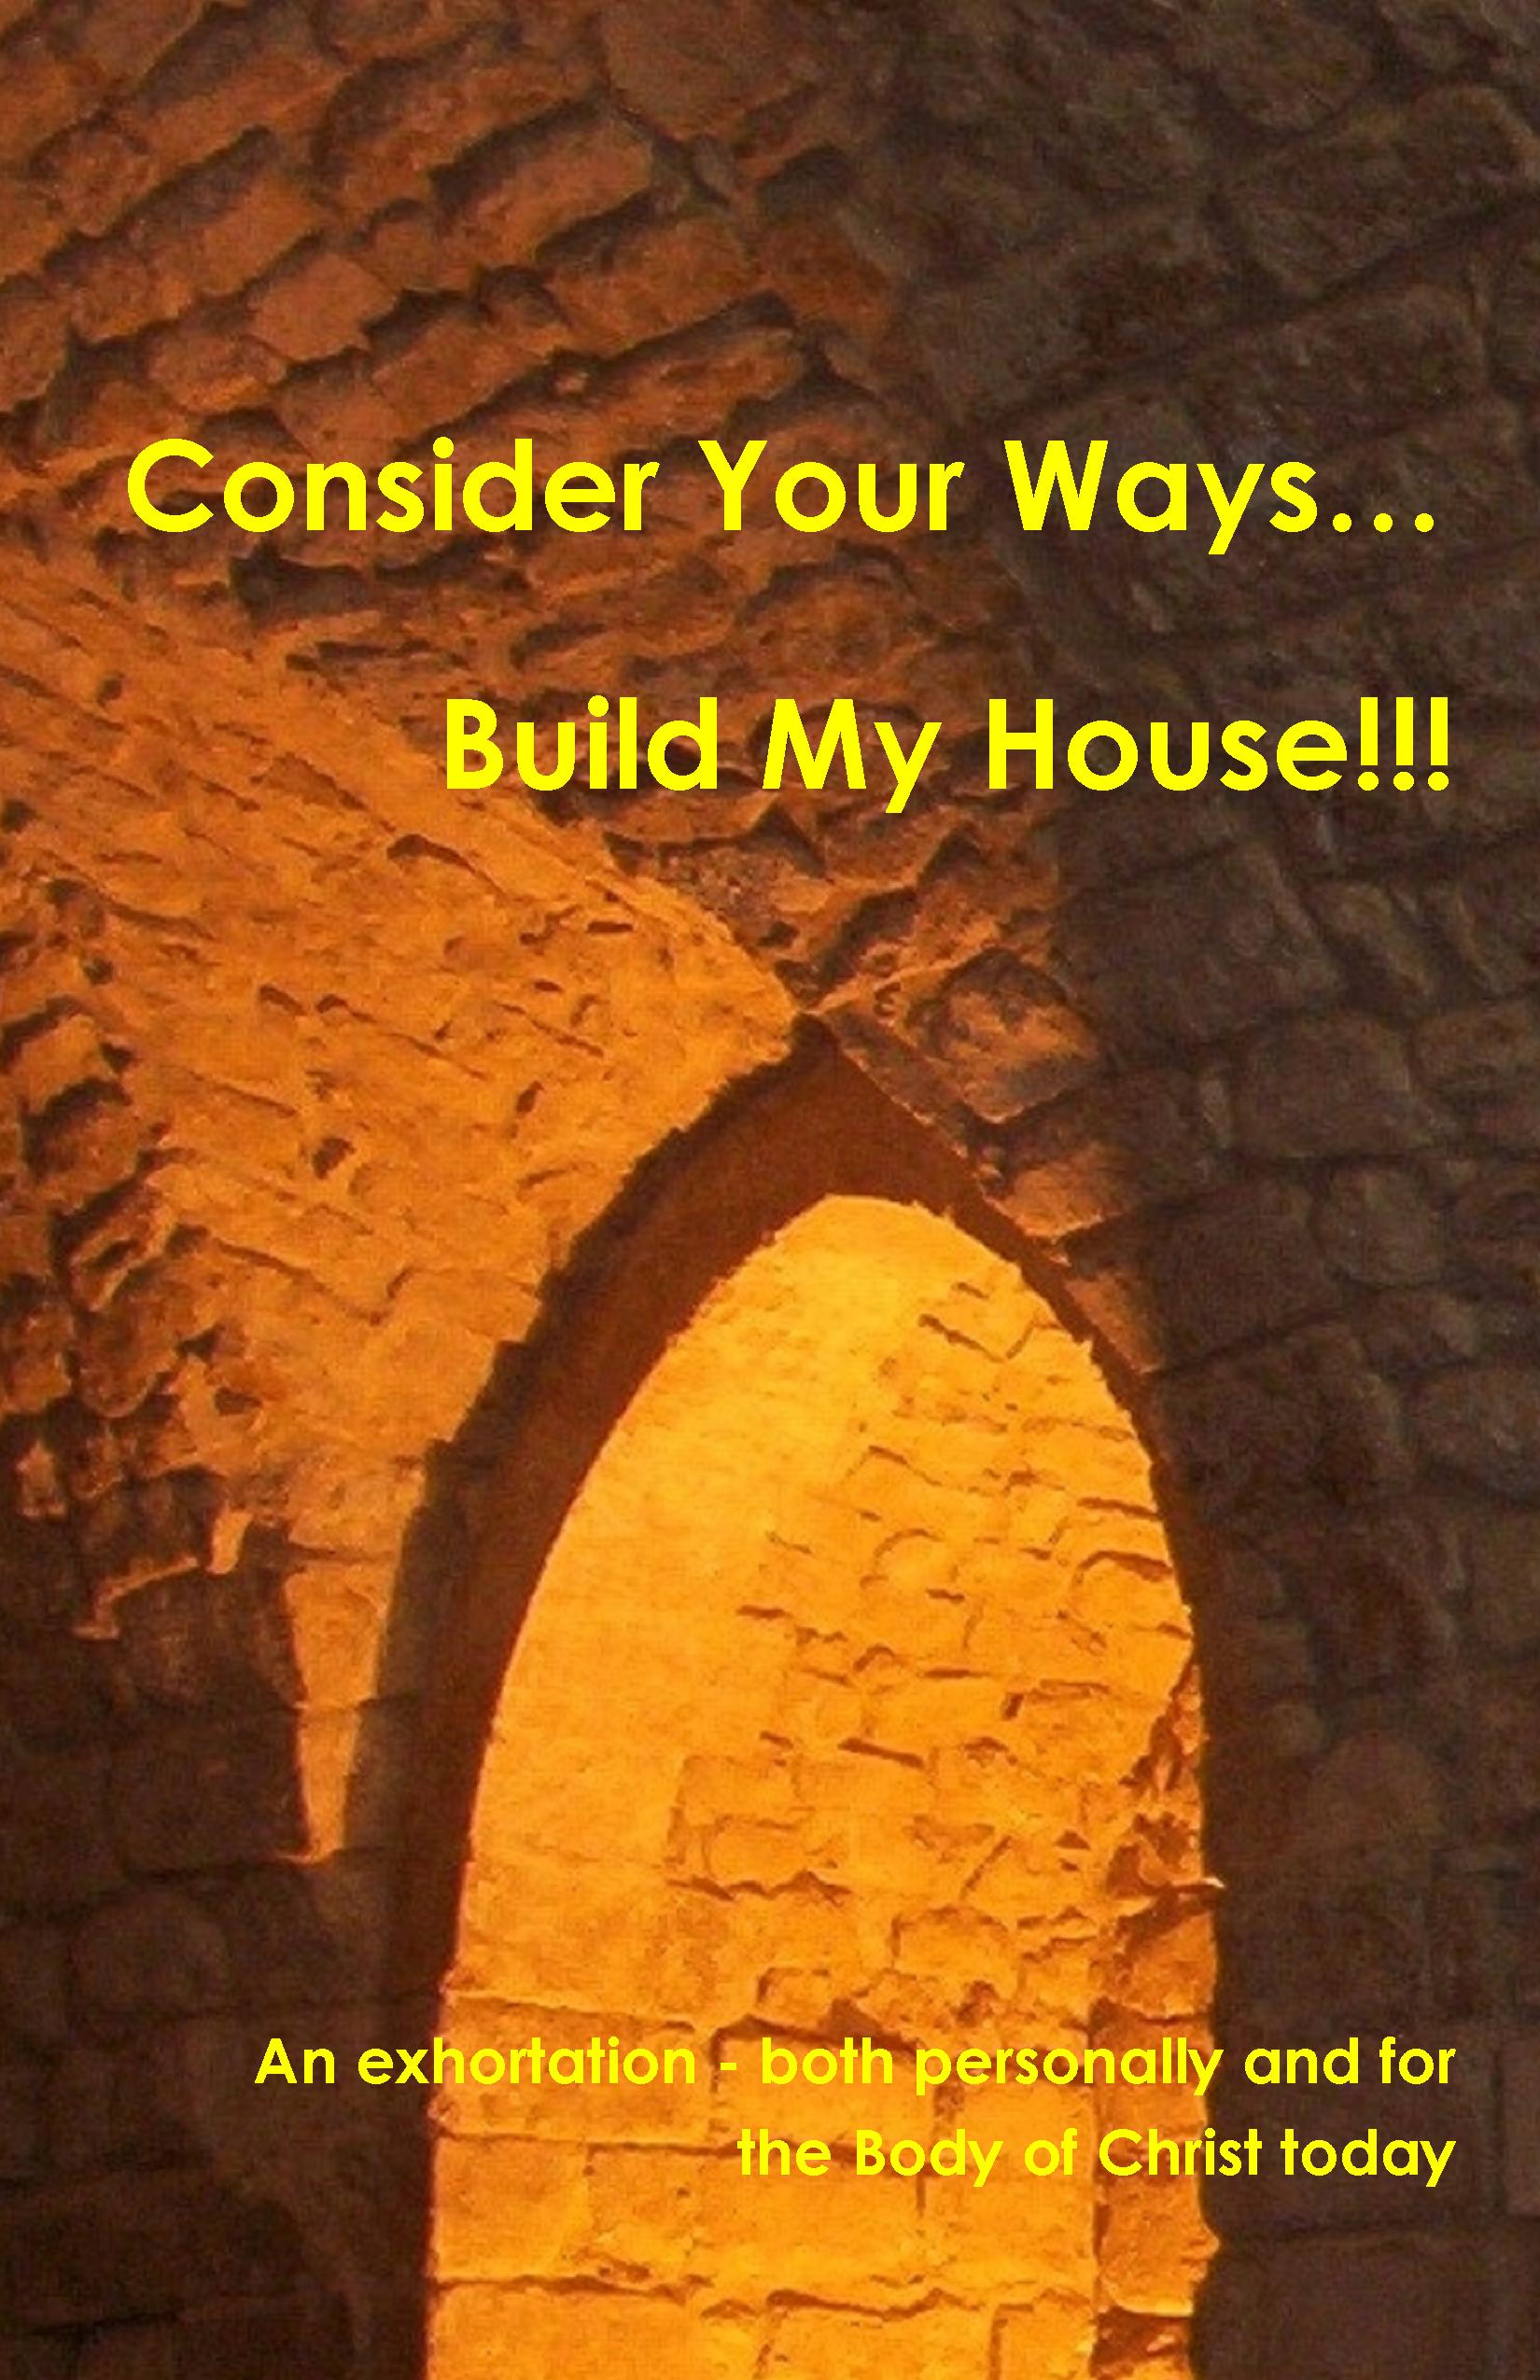 Consider Your Ways... Build my House